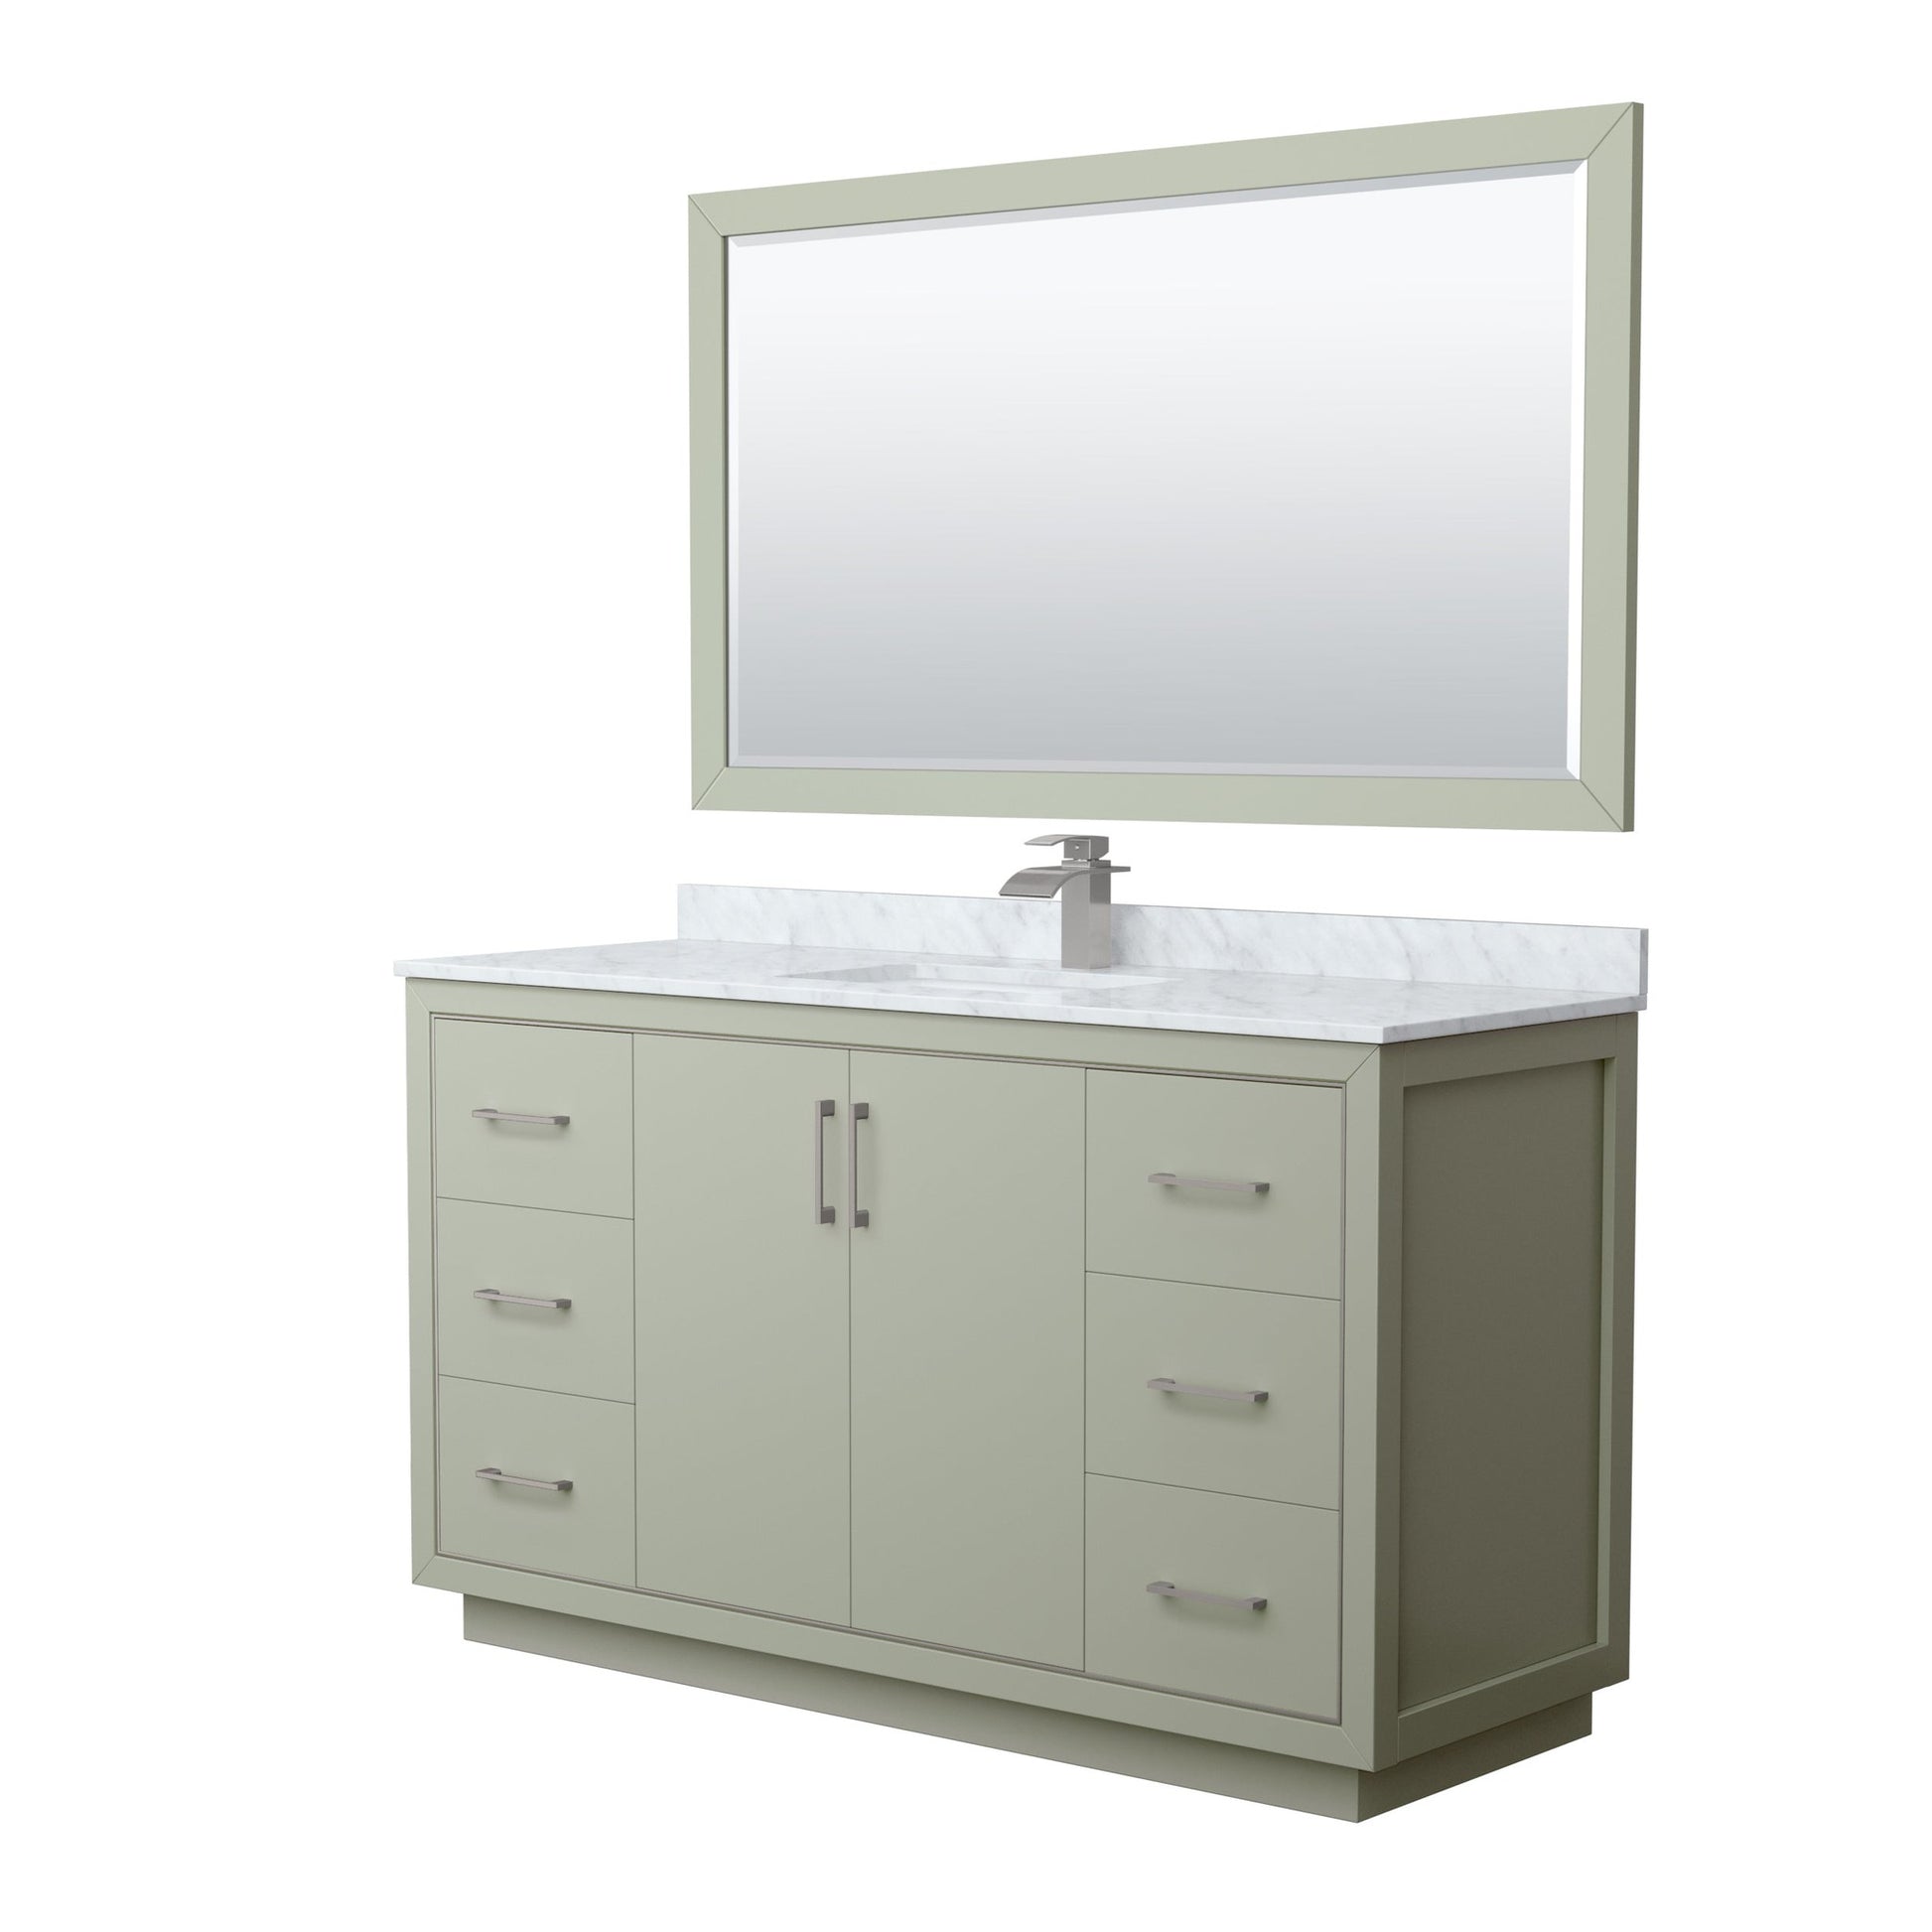 Wyndham Collection Icon 60" Single Bathroom Vanity in Light Green, White Carrara Marble Countertop, Undermount Square Sink, Brushed Nickel Trim, 58" Mirror